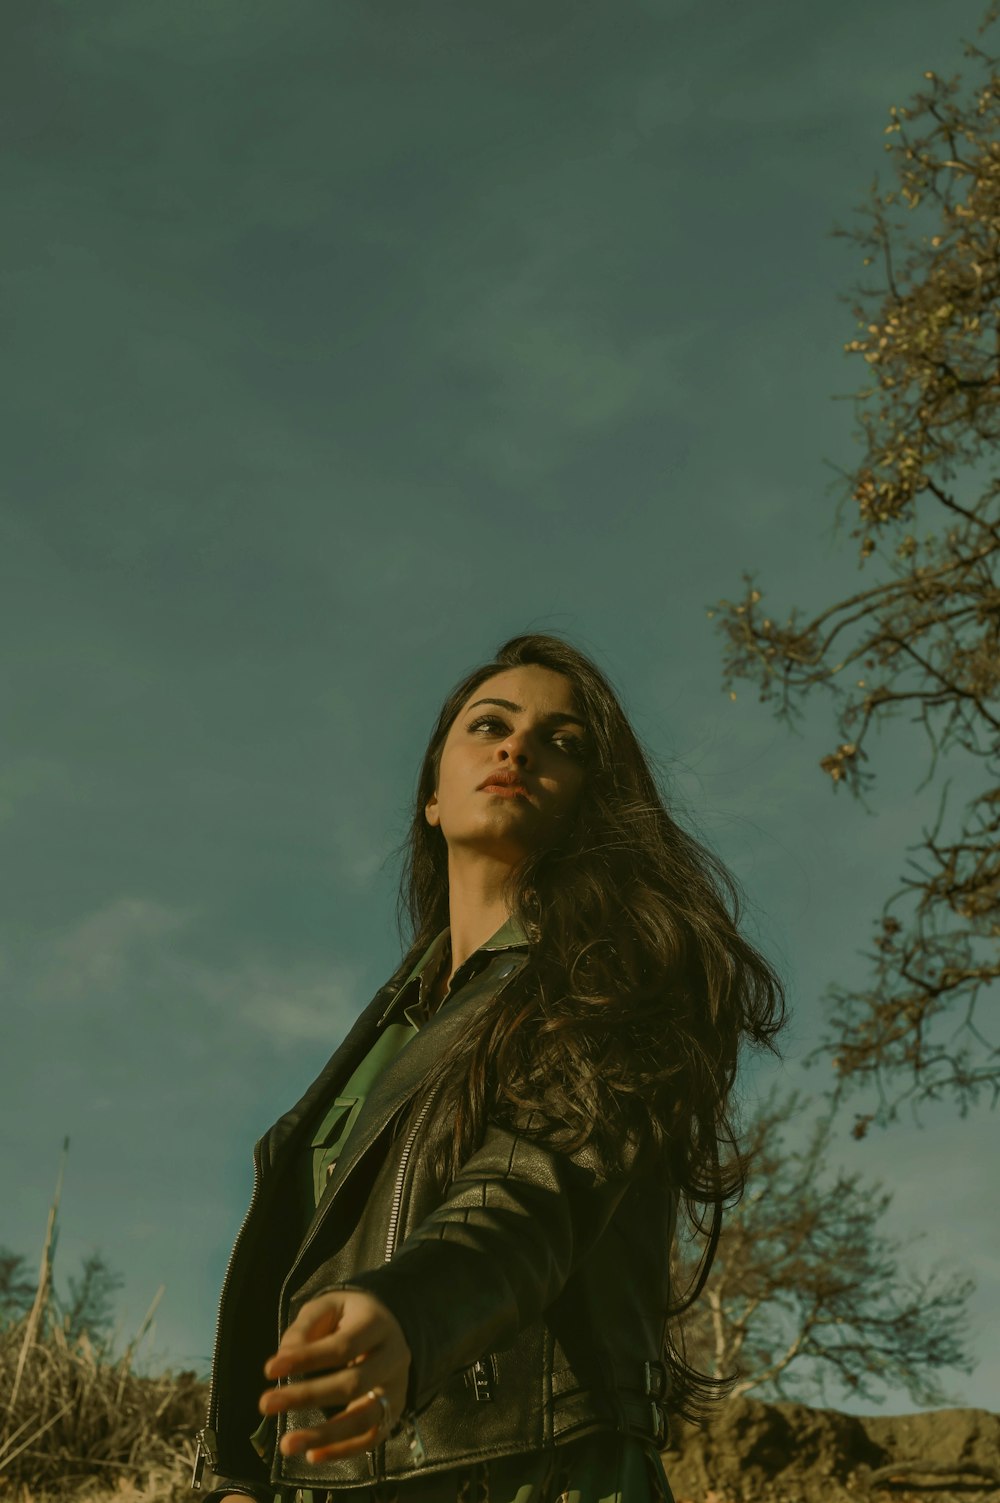 woman in black leather jacket standing near bare tree under cloudy sky during daytime